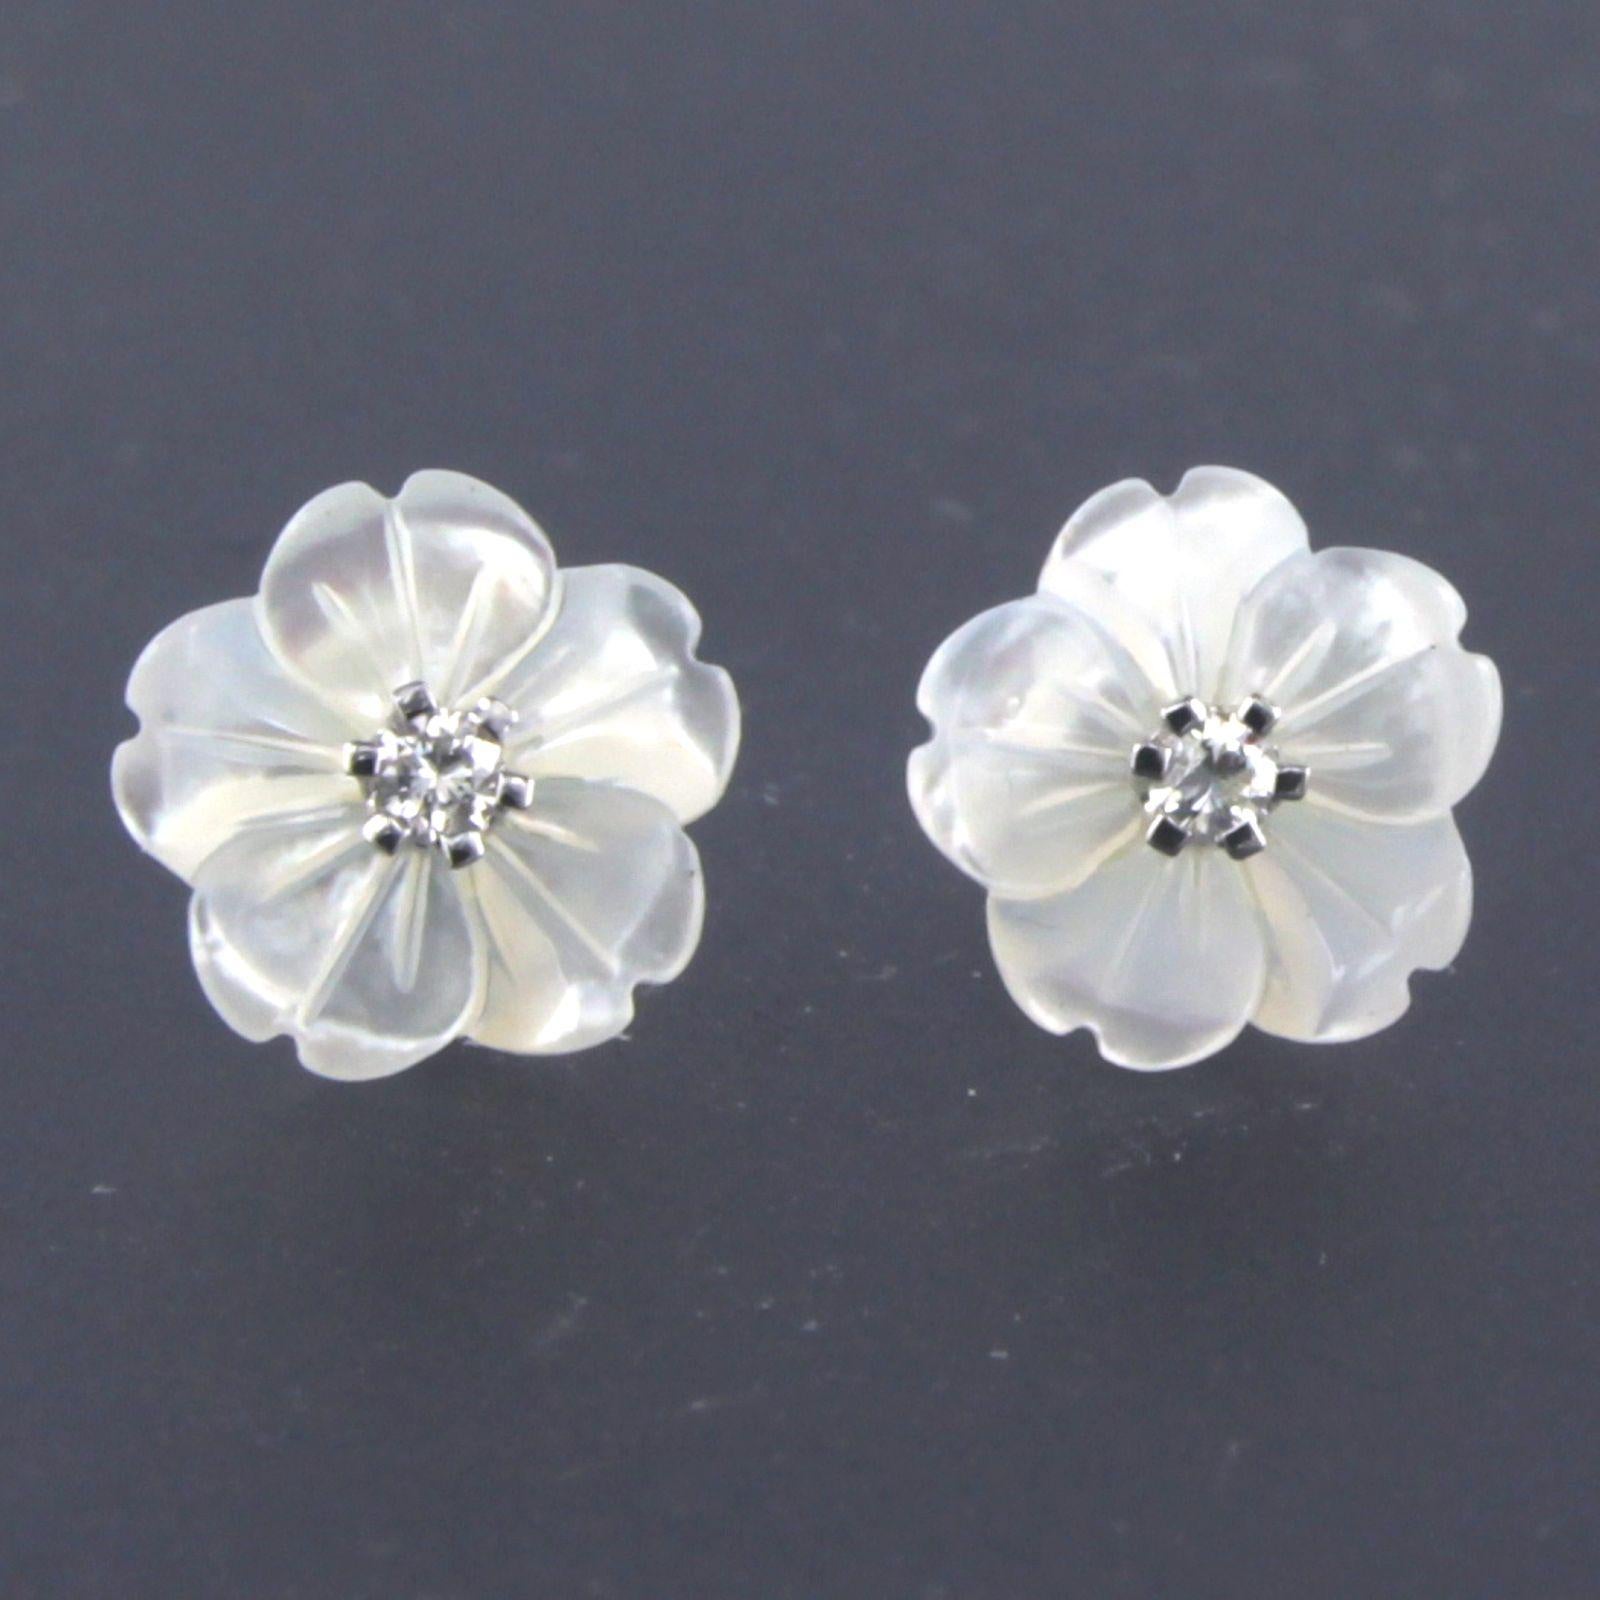 18k white gold ear studs with flower shaped white agate and brilliant cut diamond 0.08ct - G/H - VS/SI

detailed description:

the size of the ear stud has a diameter of 1.0 cm

Total weight 1.4 grams

set with

- 2 x 1.0 cm flower shape cut